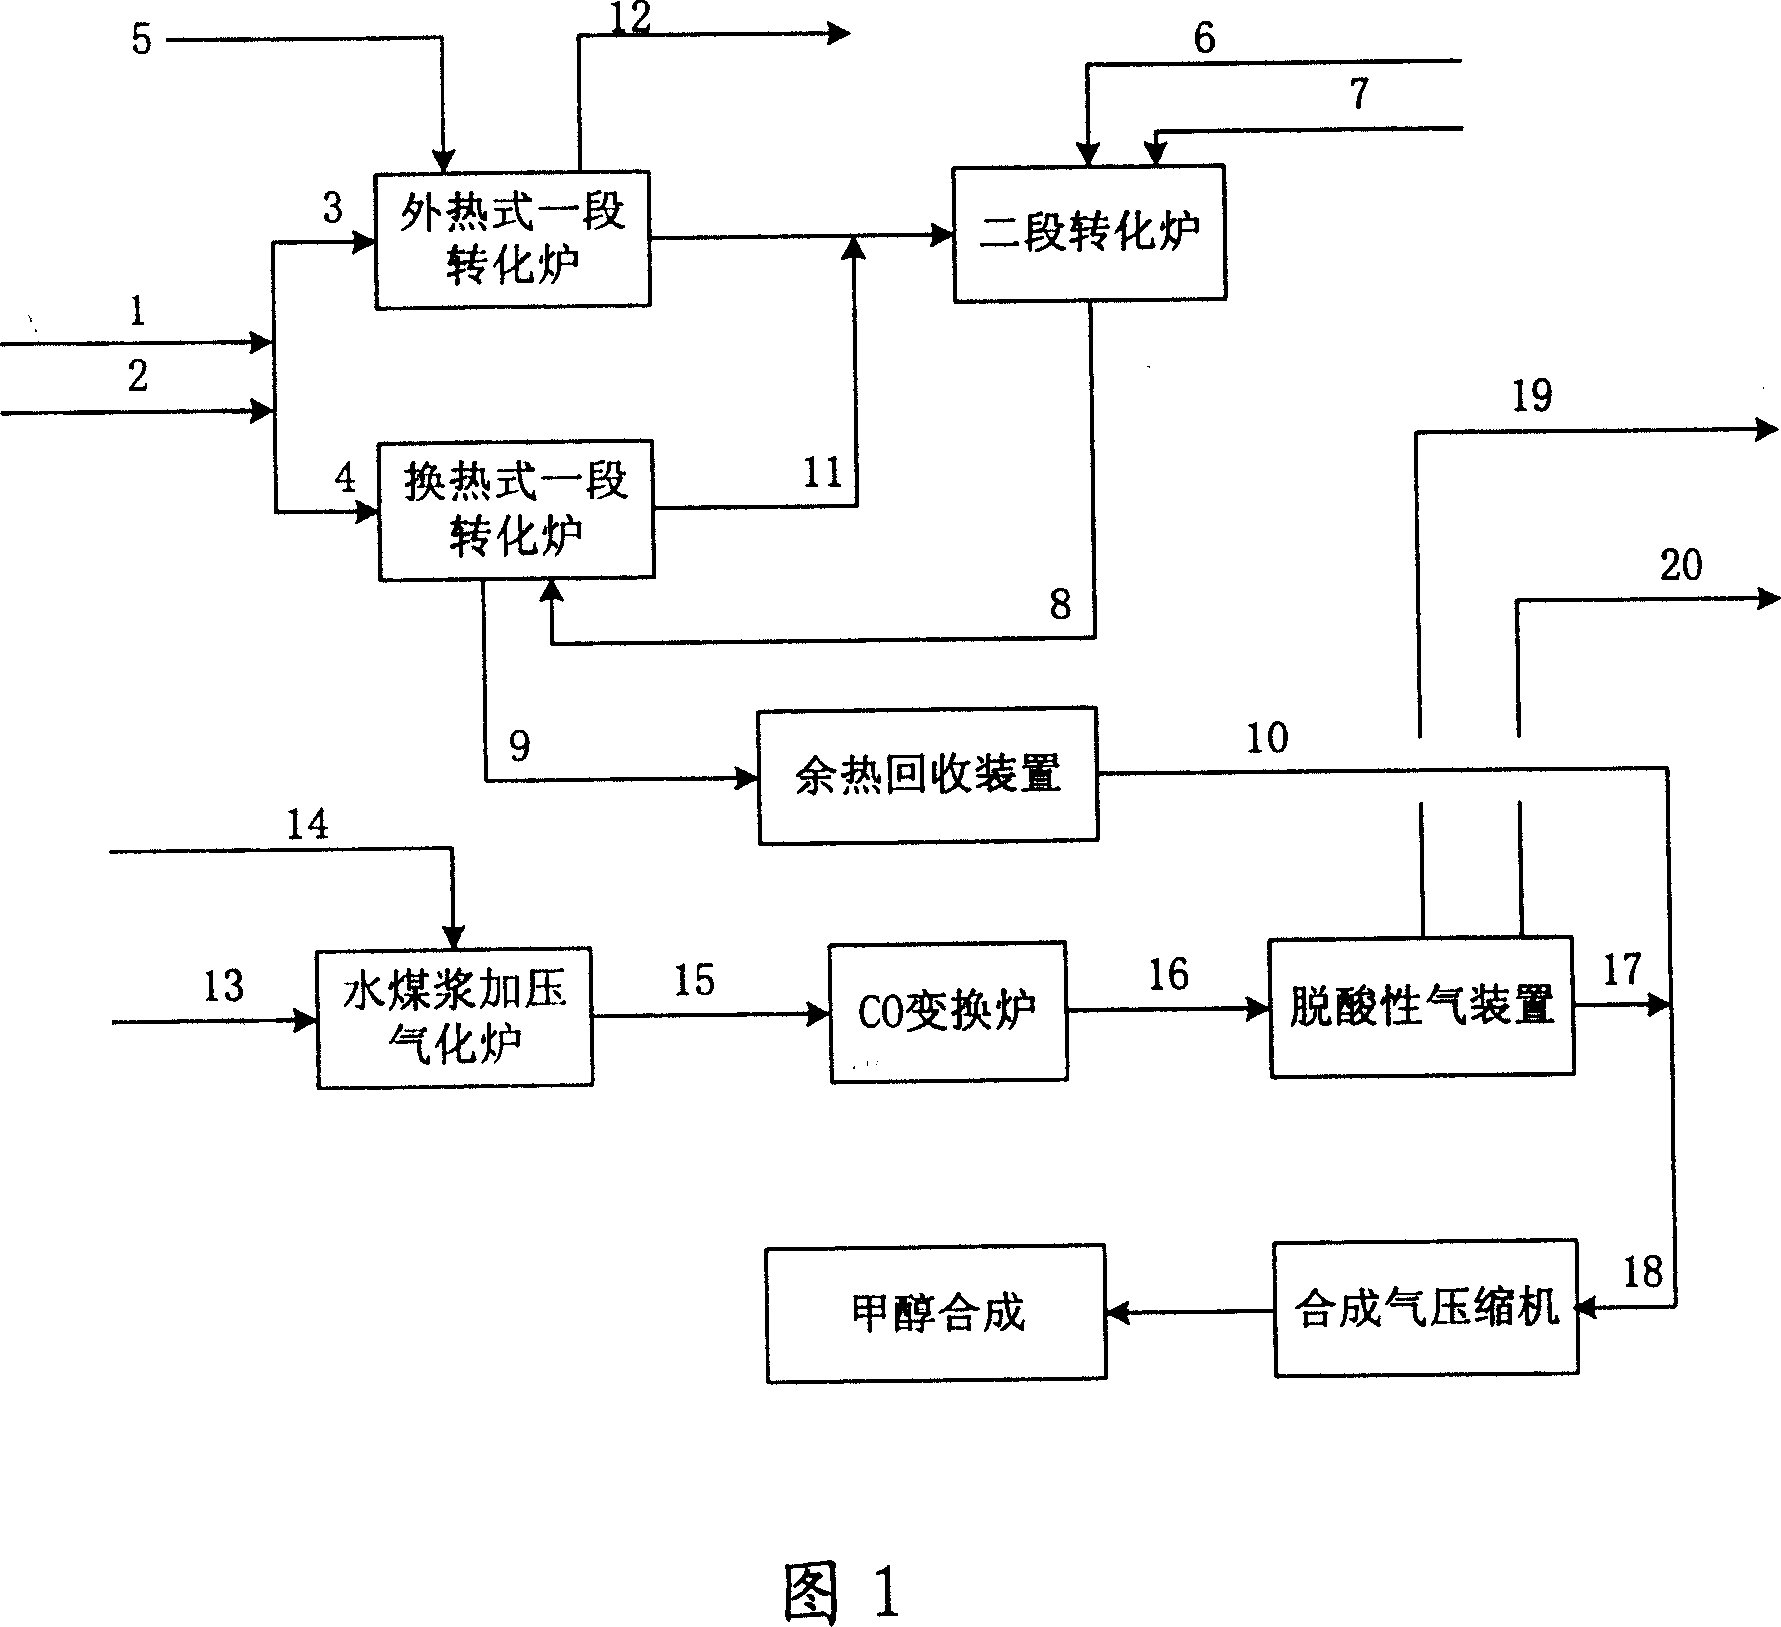 Method for producing methanol synthetic gas with hydrocarbon gas and coal as raw materials